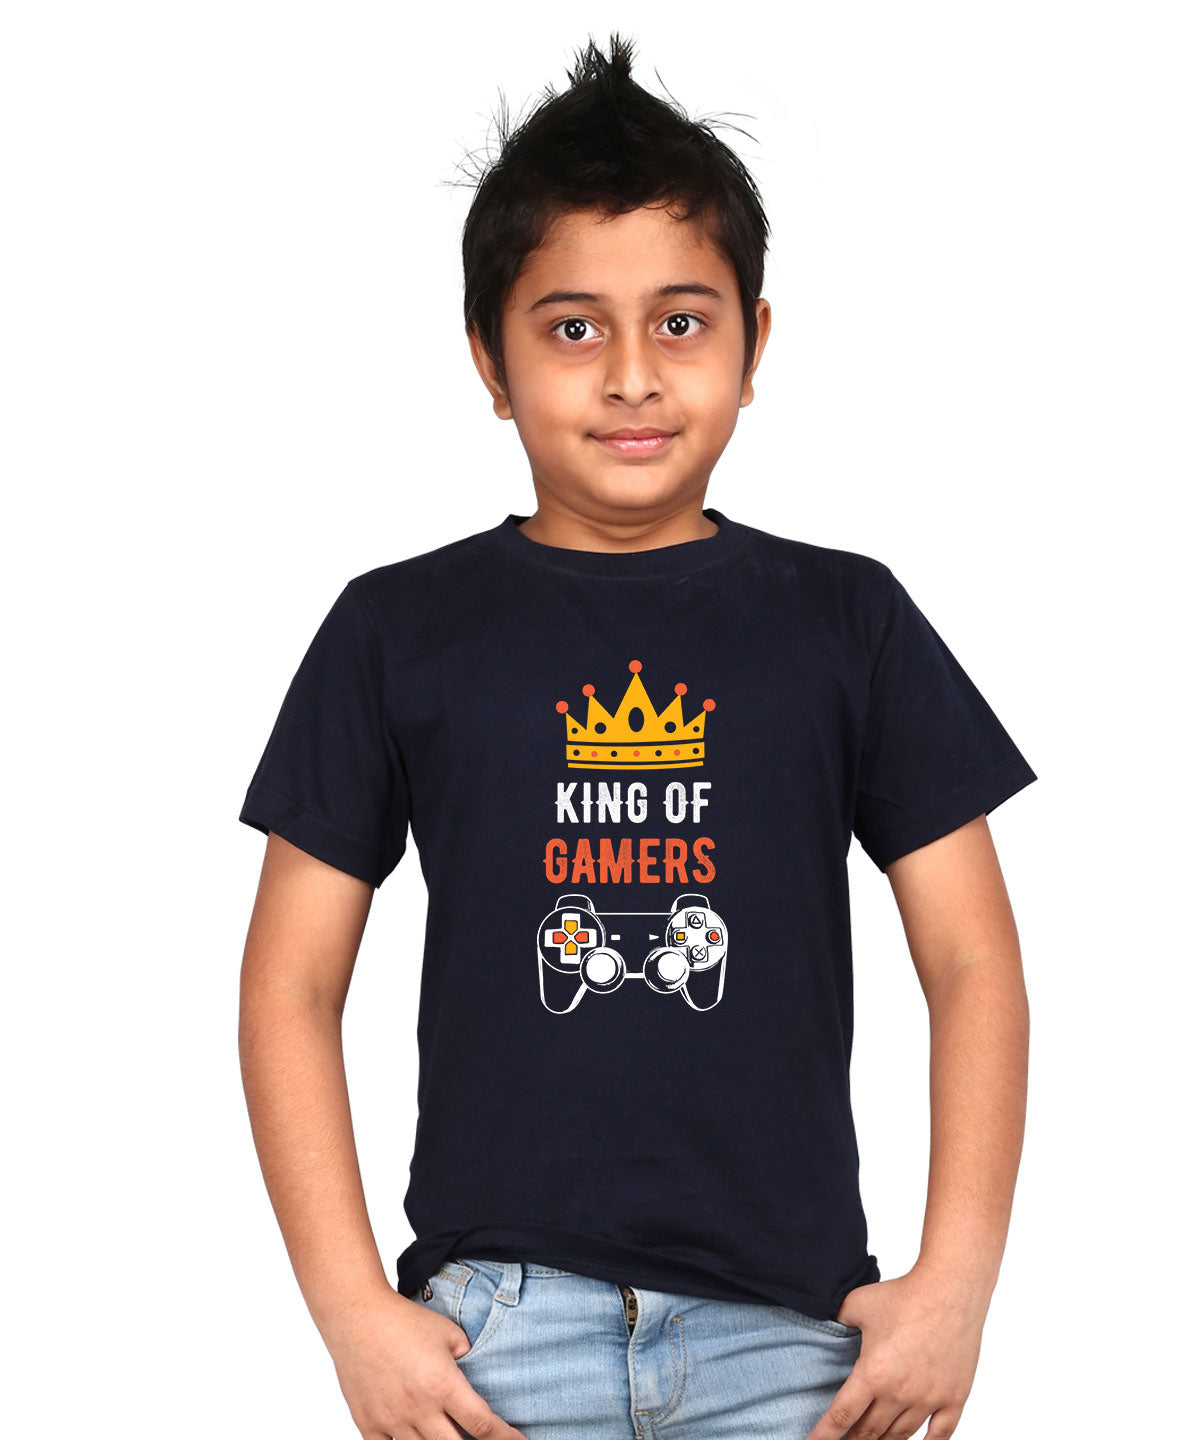 King of Gamers - Premium Round Neck Cotton Tees for Juniors - Navy Blue